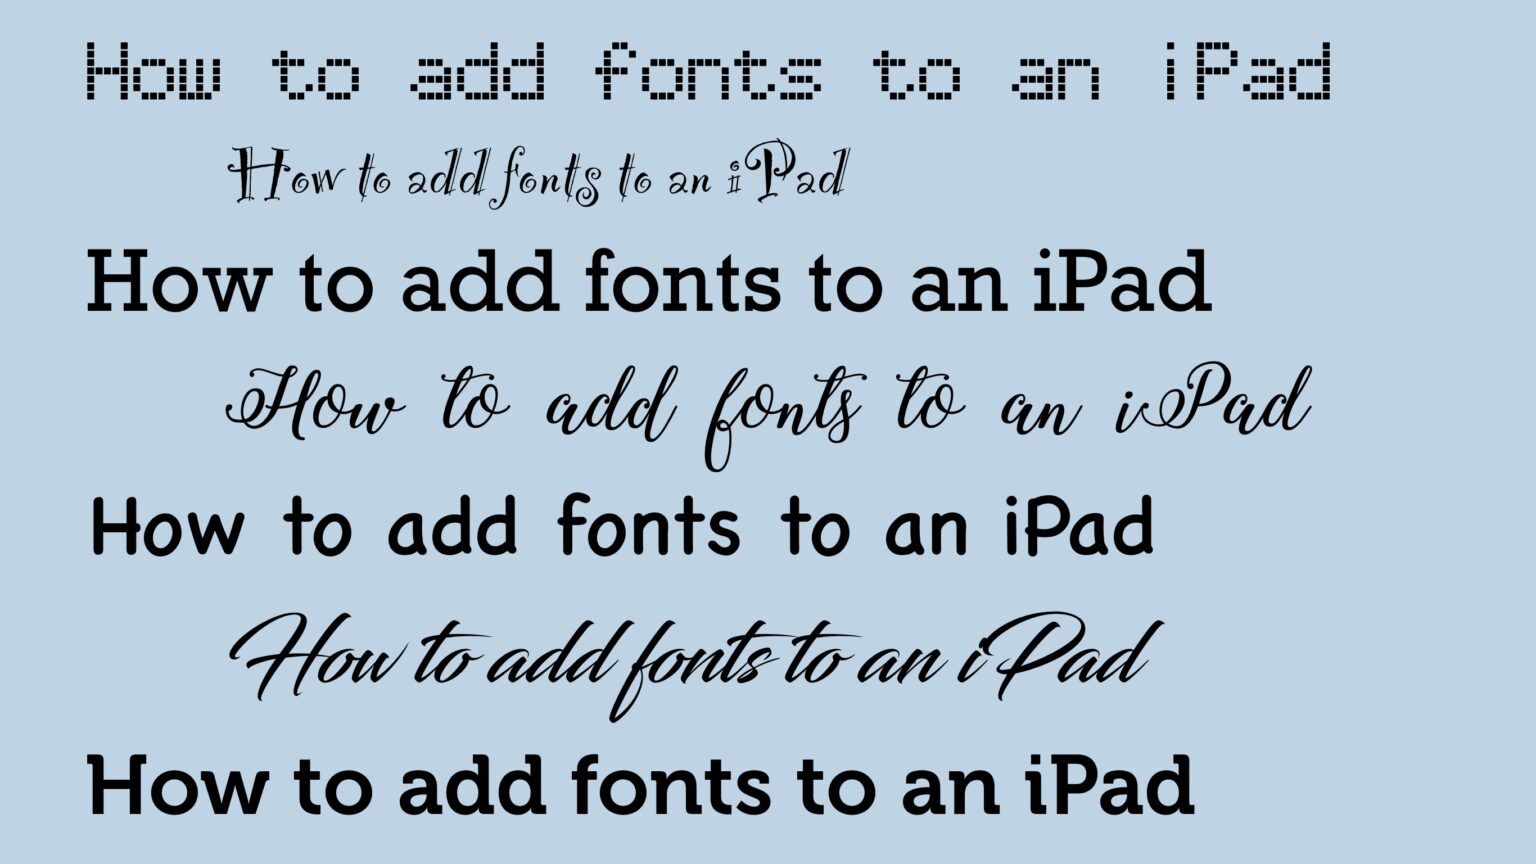 How to add fonts to an iPad